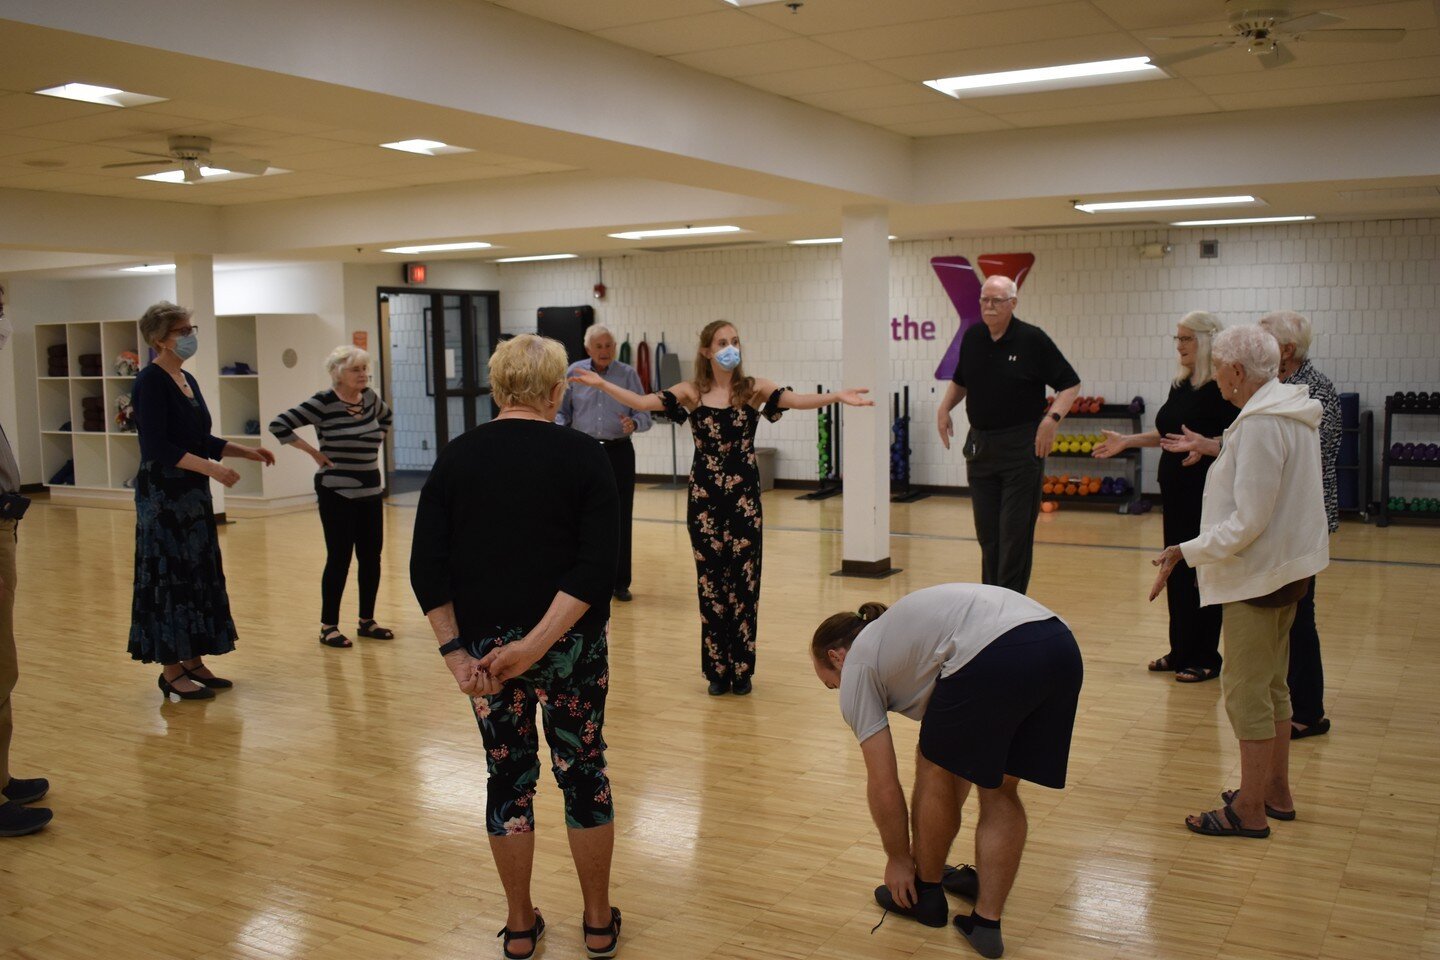 Our Dance for Life program is starting at the Southdale YMCA! Get a taste of the program this Saturday at 1:15pm at our FREE 1 hour workshop titled &quot;This is Your Brain on Dance.&quot; Classes will be Mondays and Wednesdays from 4-5pm starting Se